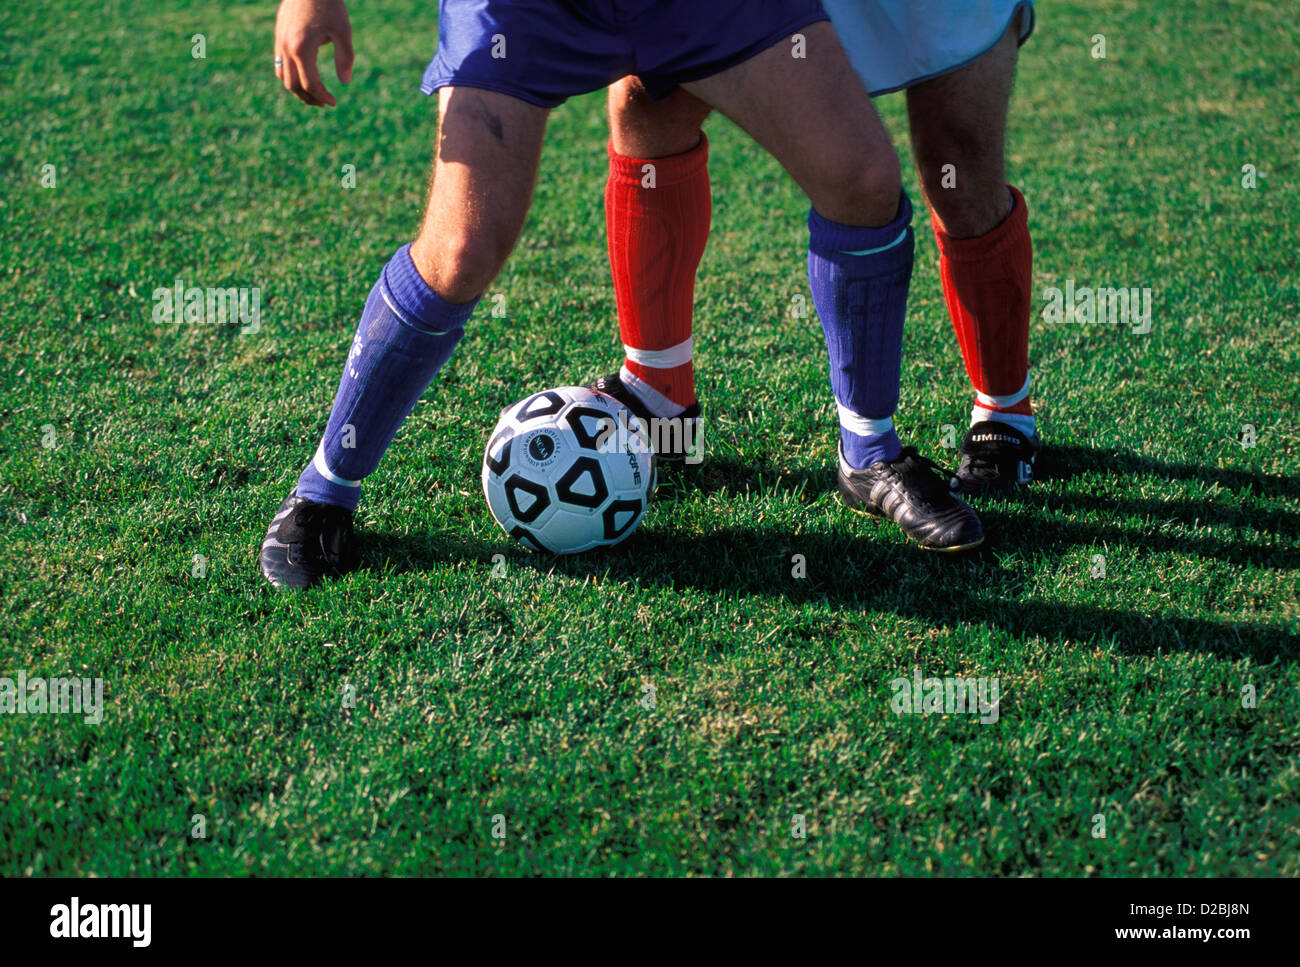 Soccer Ball And Legs Of Two Opposing Players Stock Photo